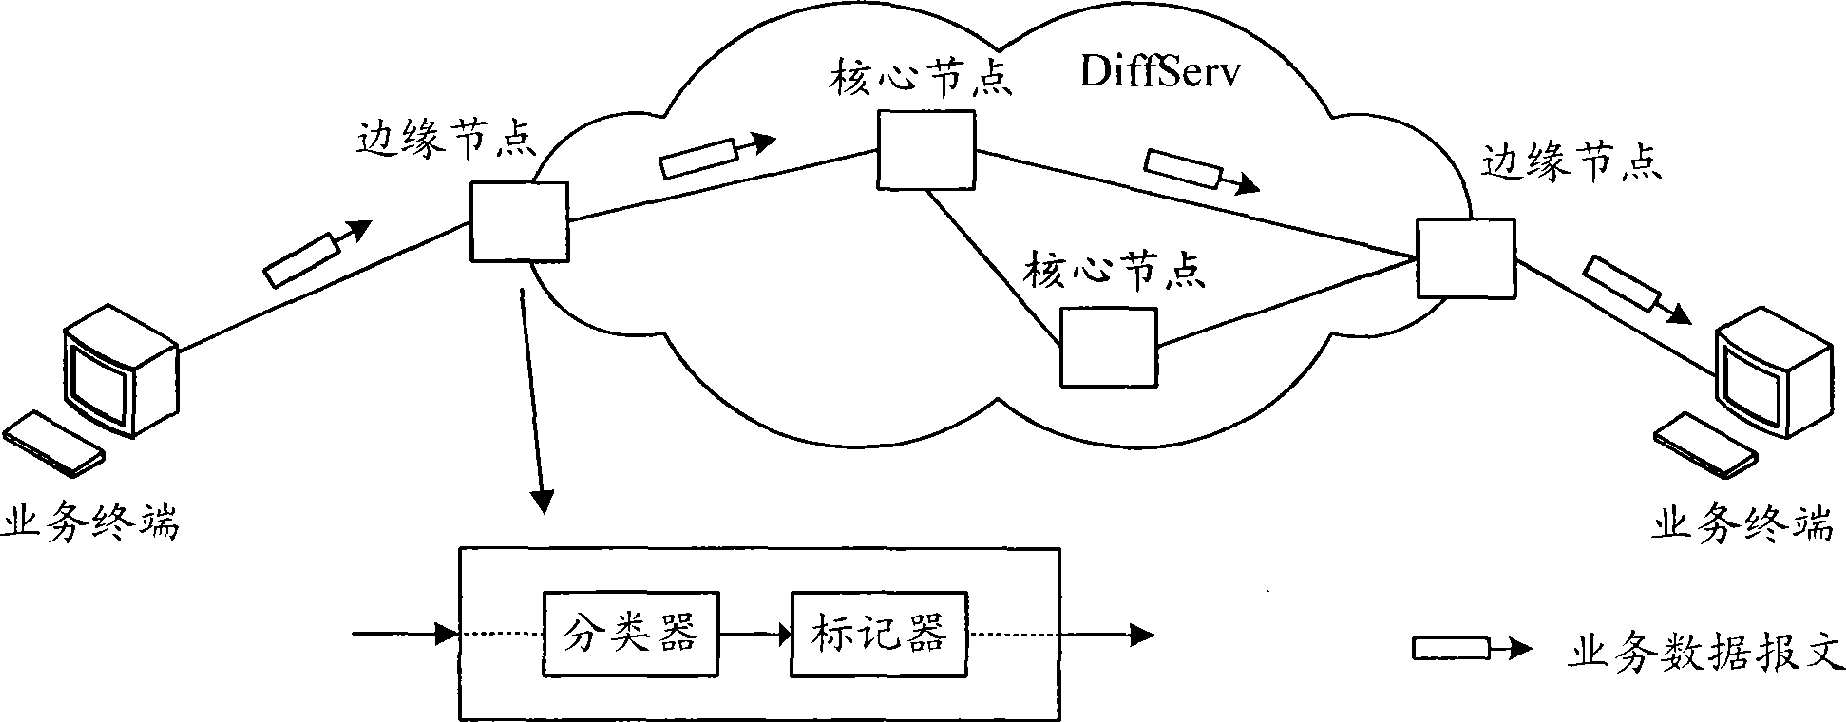 System and method for implementing self-governing QoS based on service network differentiation and IPv6 spreading head